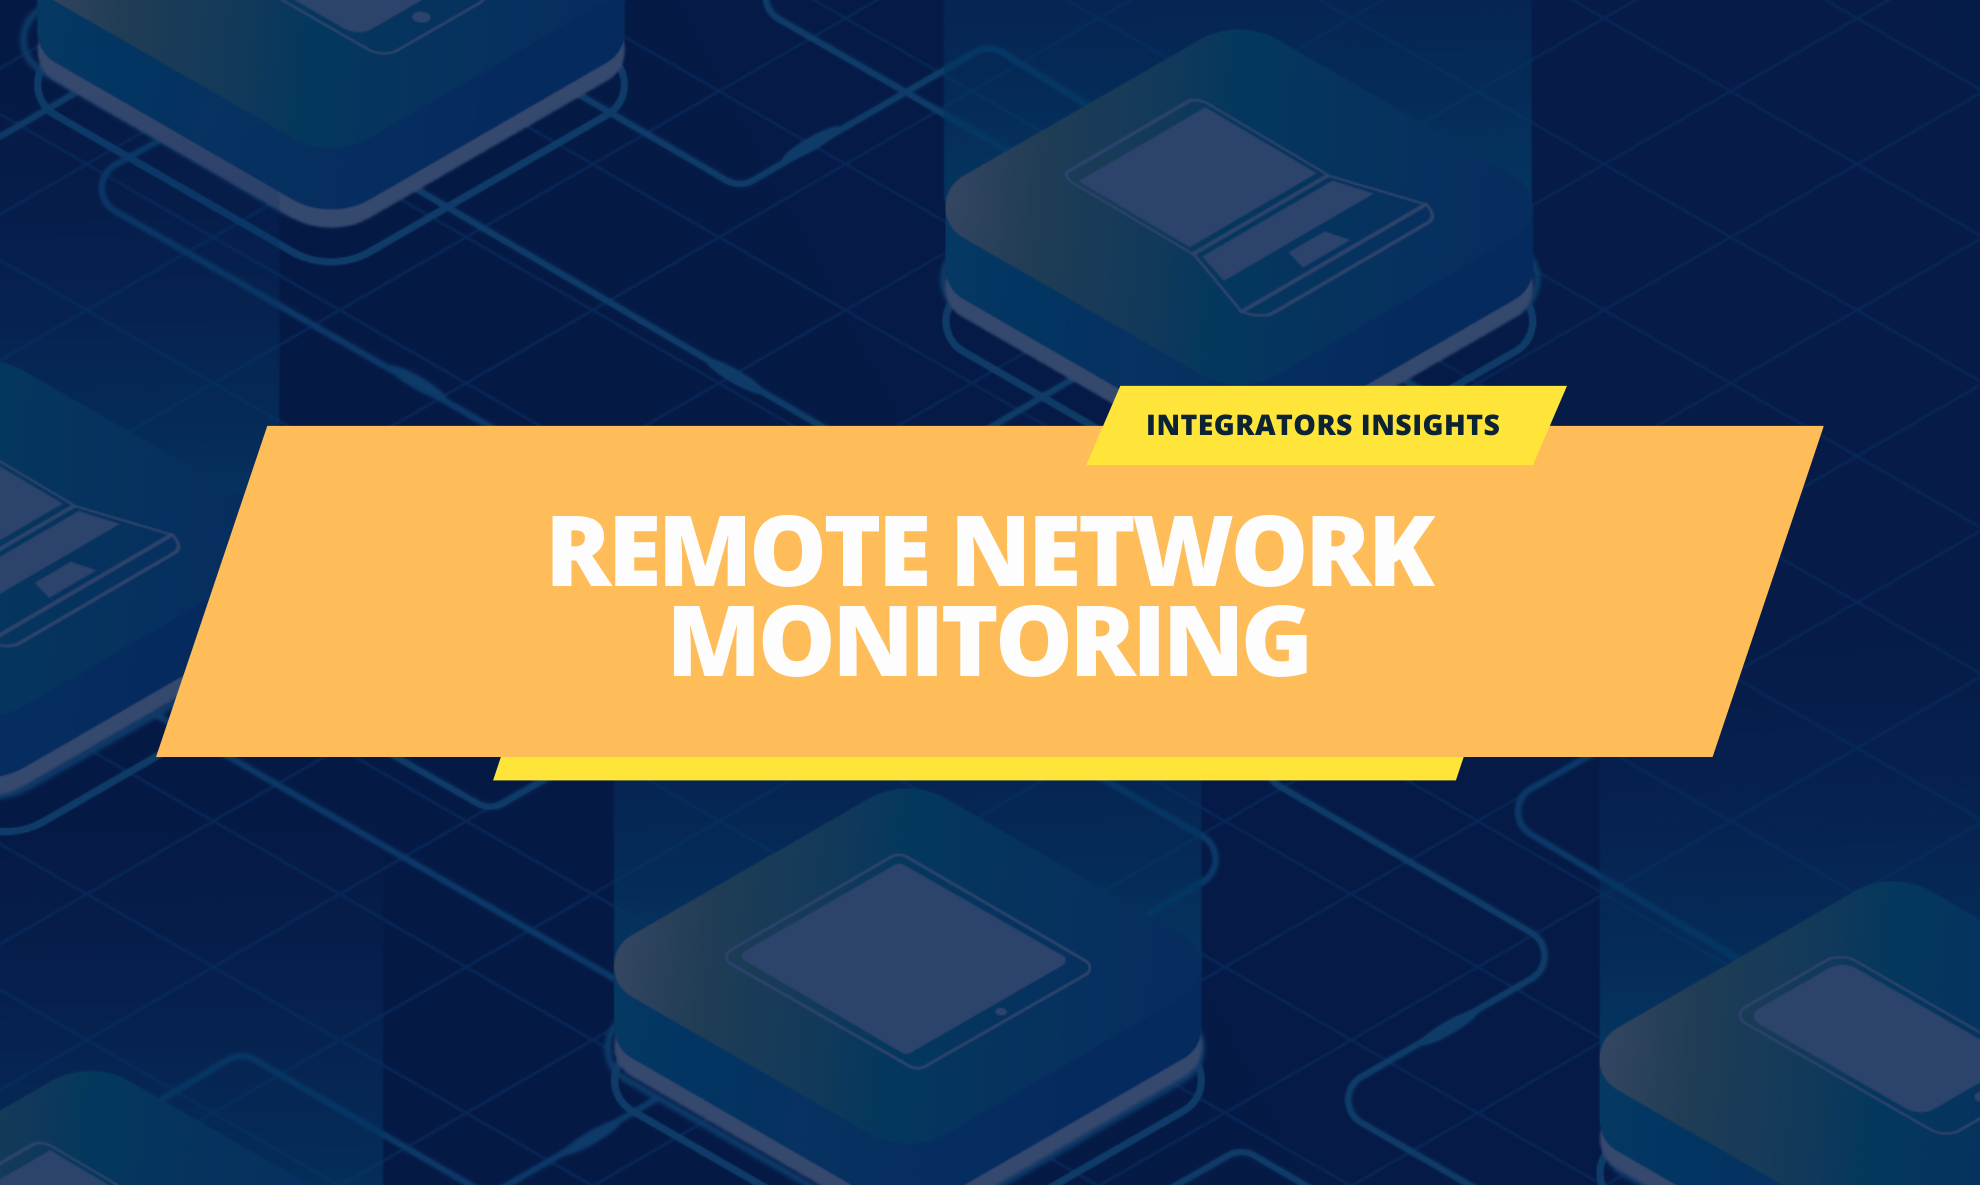 Remote network monitoring: The recurring revenue opportunity